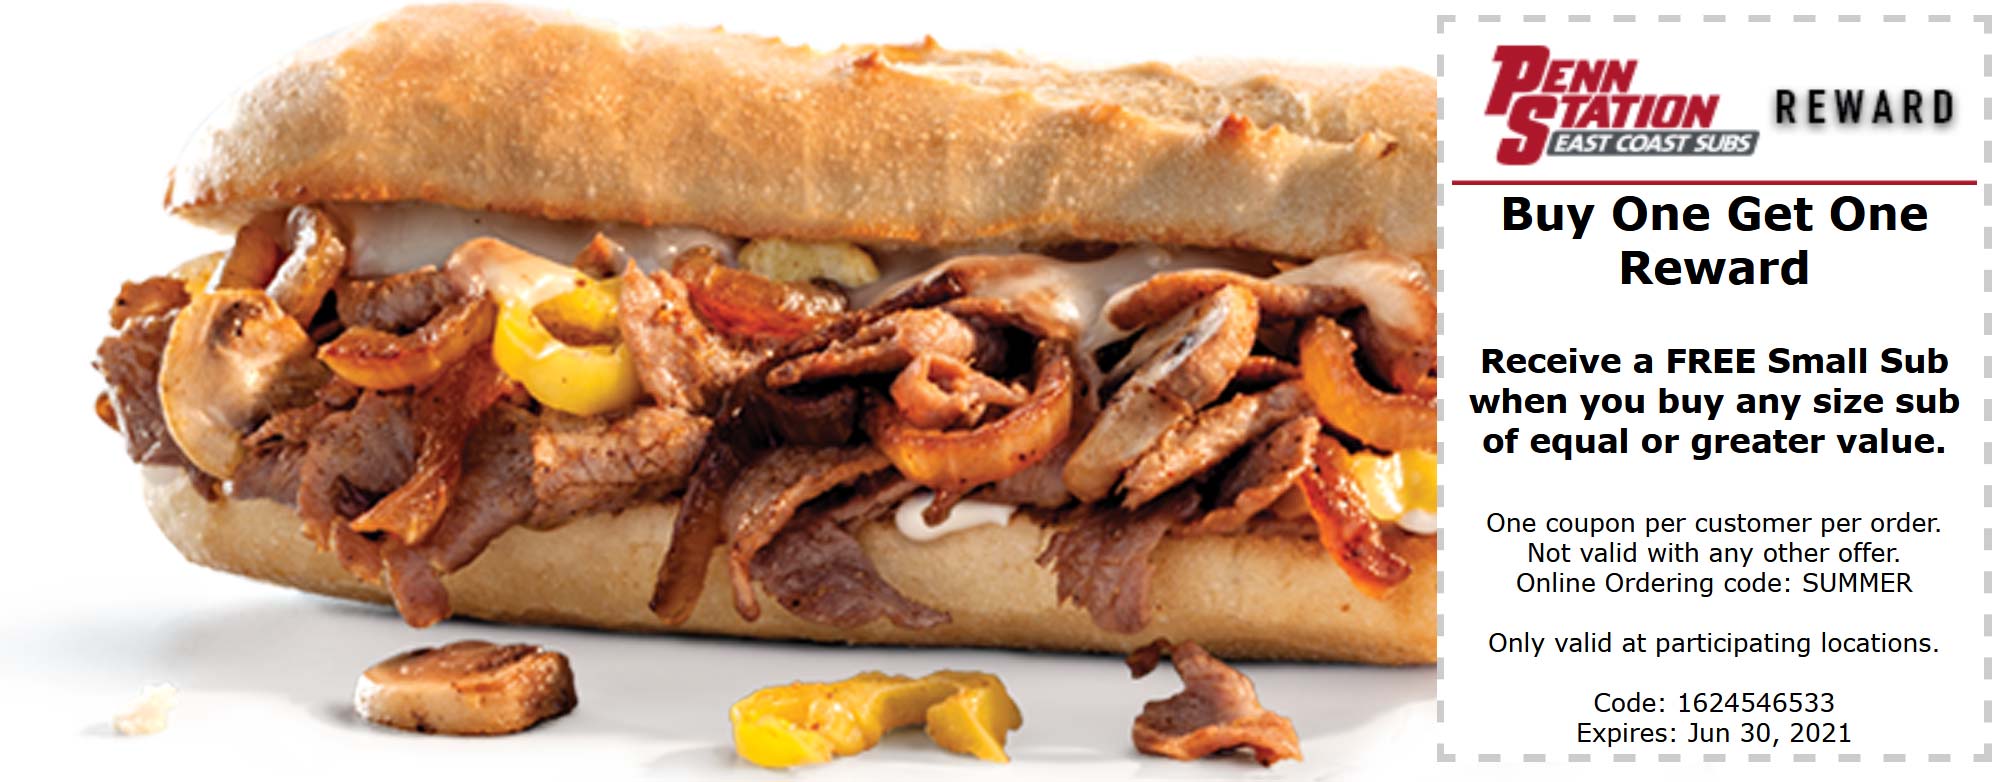 Penn Station restaurants Coupon  Second sub sandwich free at Penn Station East Coast Subs, or online via promo code SUMMER #pennstation 